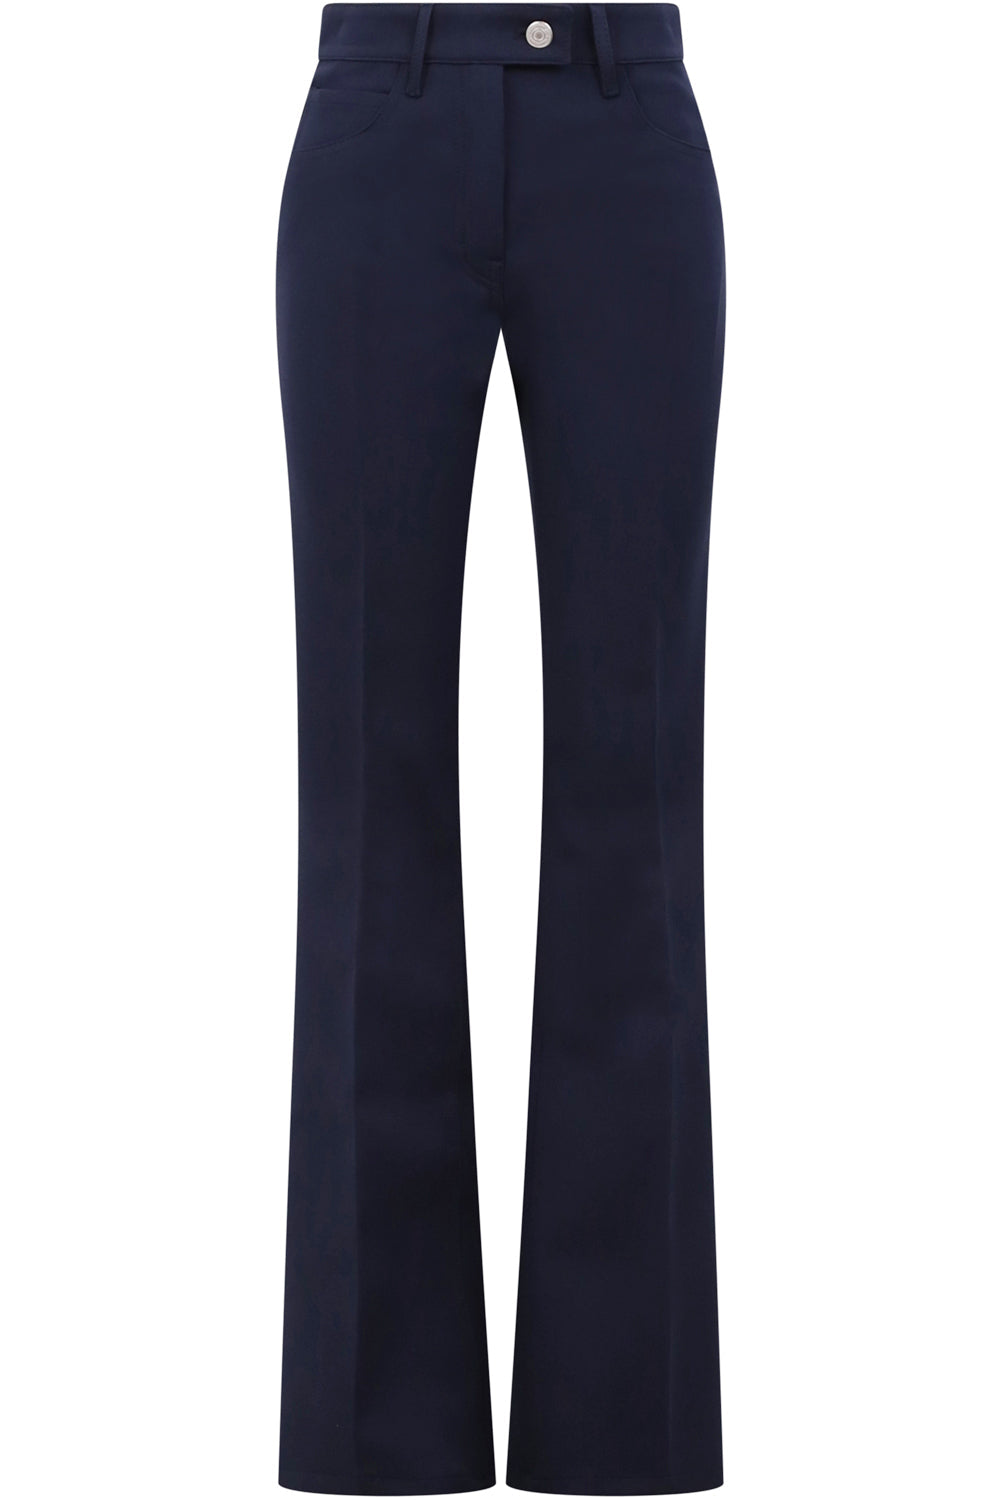 Navy Bootcut Trousers